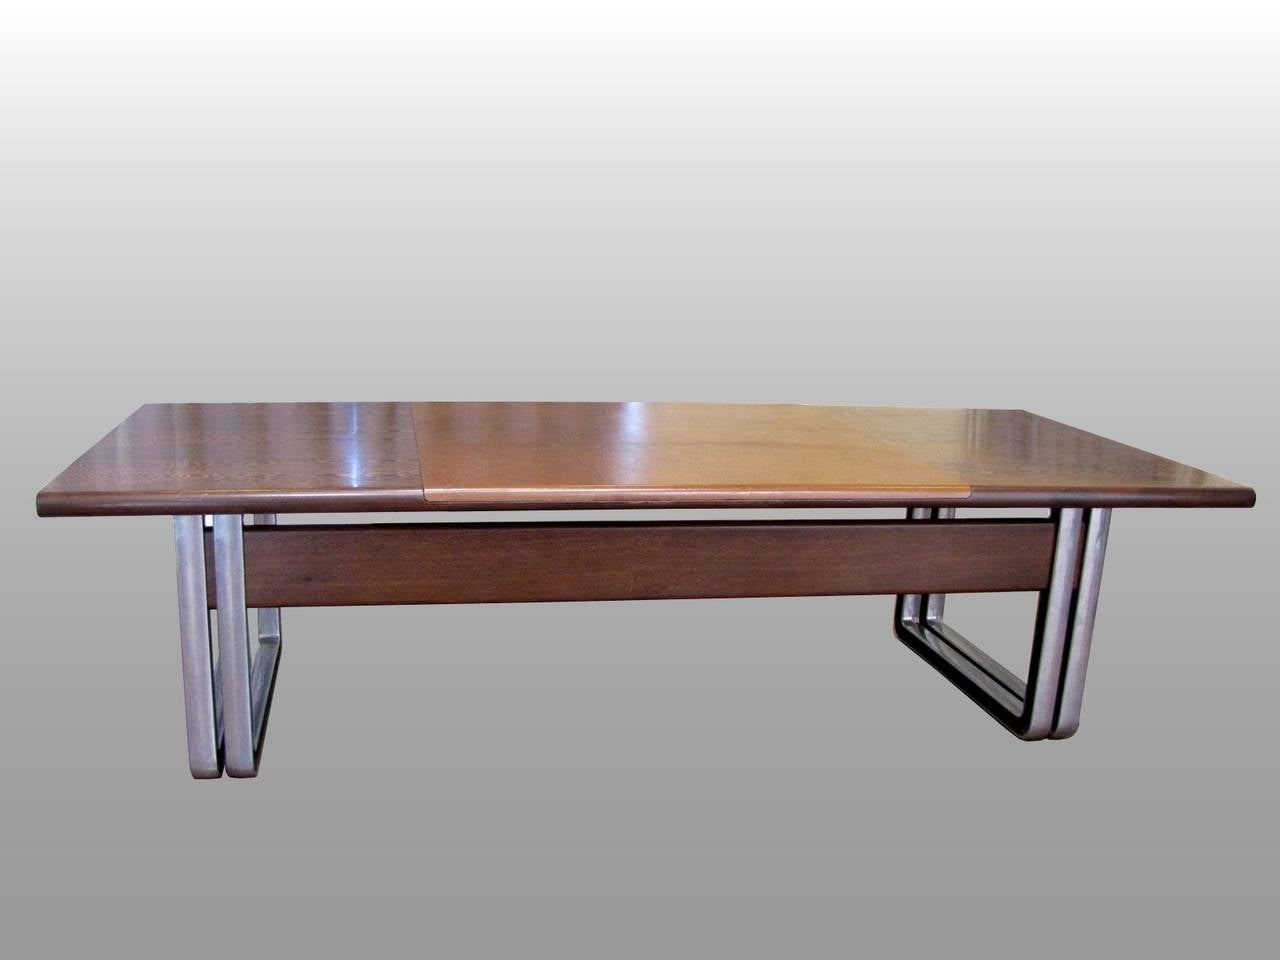 Large 1970s Italian desk by Osvaldo Borsani, with base in chrome metal and black leather clad interior. Two small drawers in the front; top surface in wenge and leather.